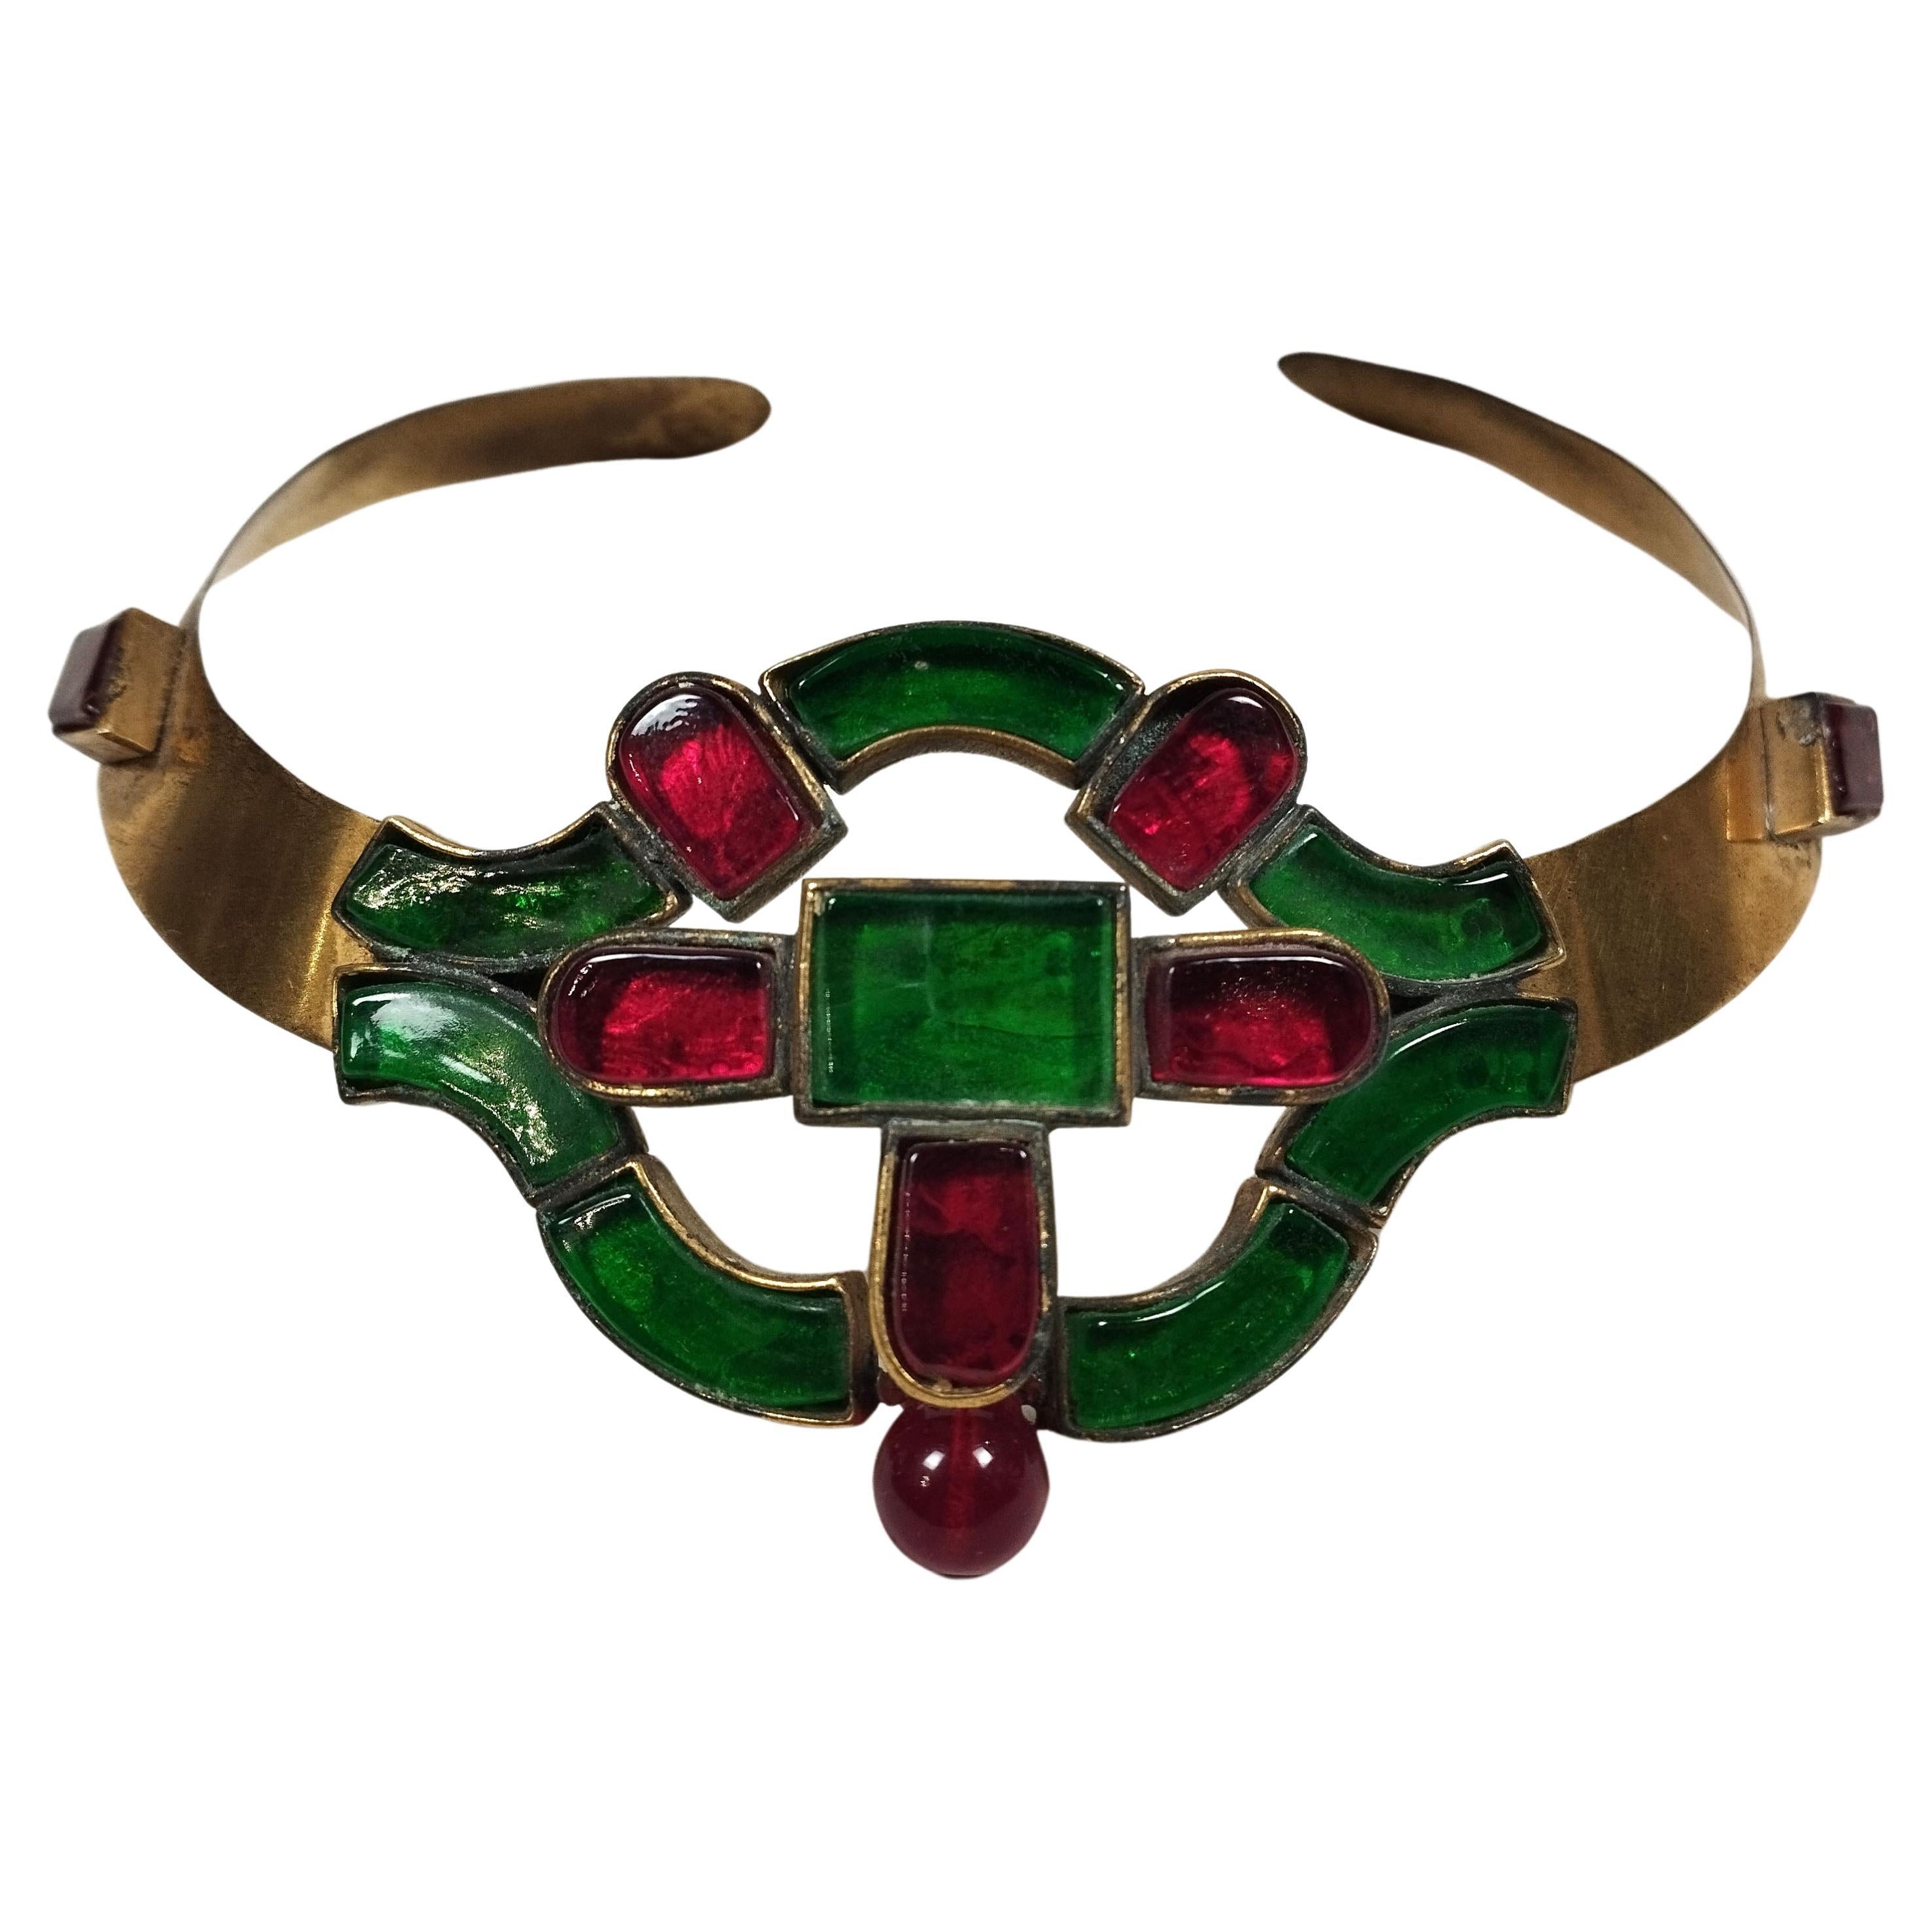 Maison Gripoix for Chanel Brass and Colored Glass Choker